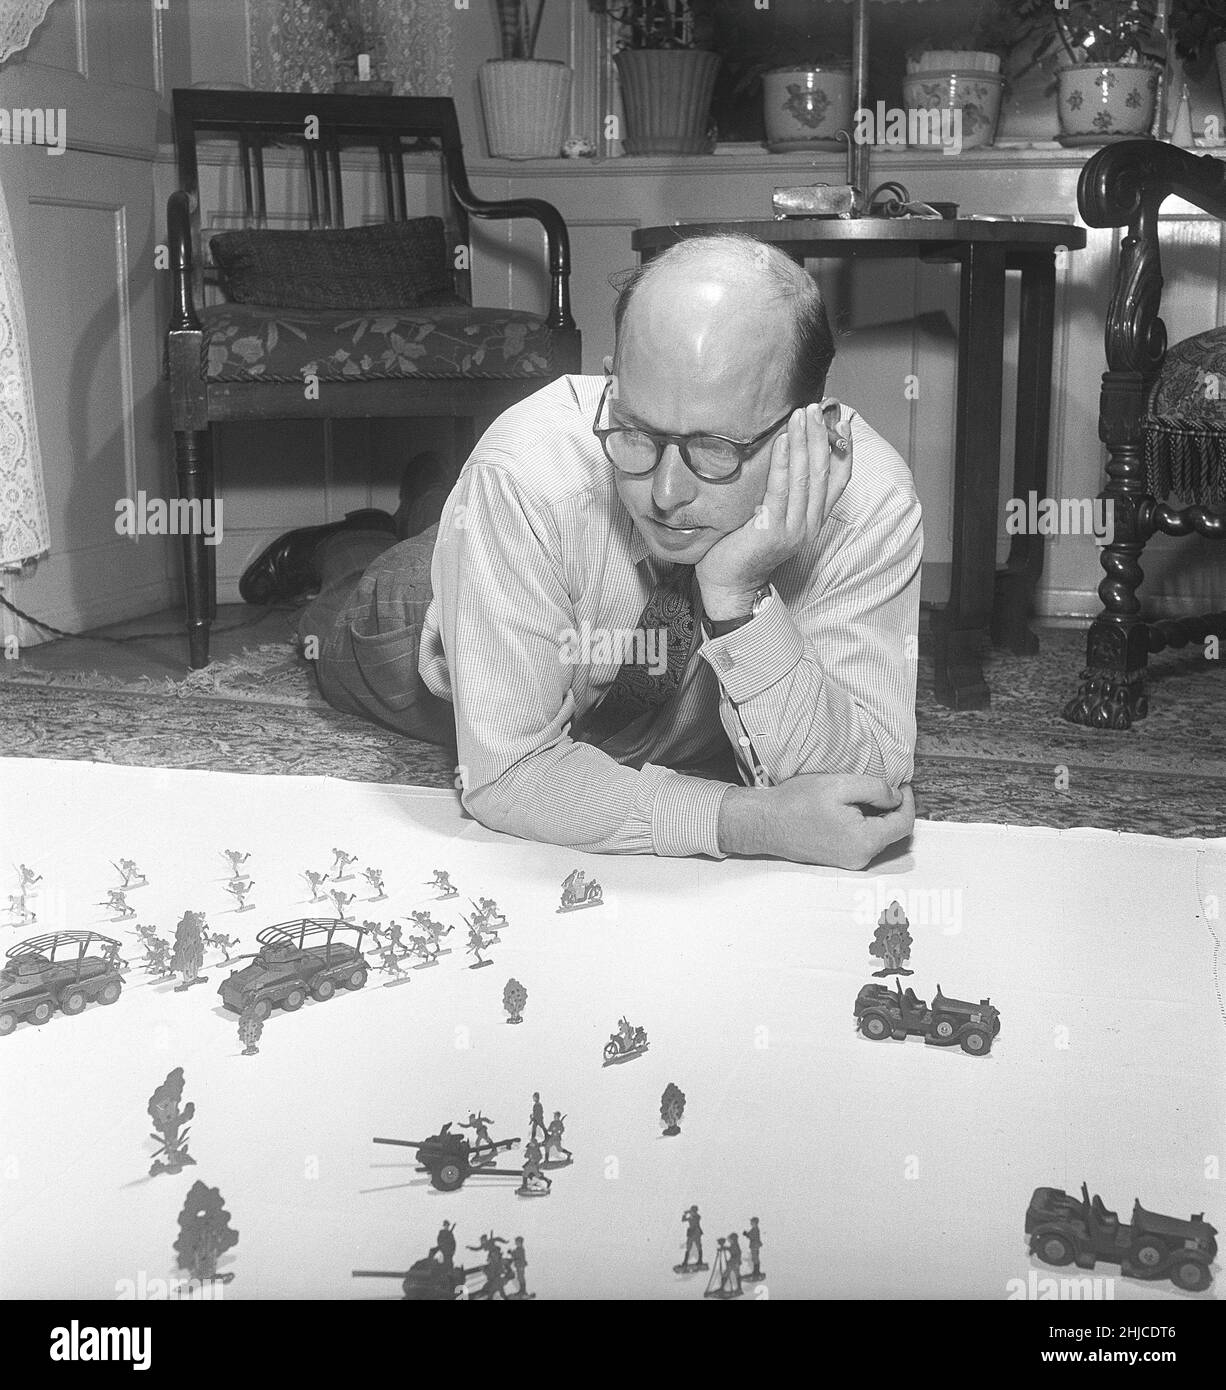 Tin soldiers in the 1950s. A member of the danish tin figure collectors with a his collection of tin soldiers and tin toys. Tin soldiers were a historic hobby often in themes. Tin was melted and poured into forms of the figures that when they had cooled off and taken out of the forms were painted carefully. 1952. Kristoffersson ref BE30-9 Stock Photo